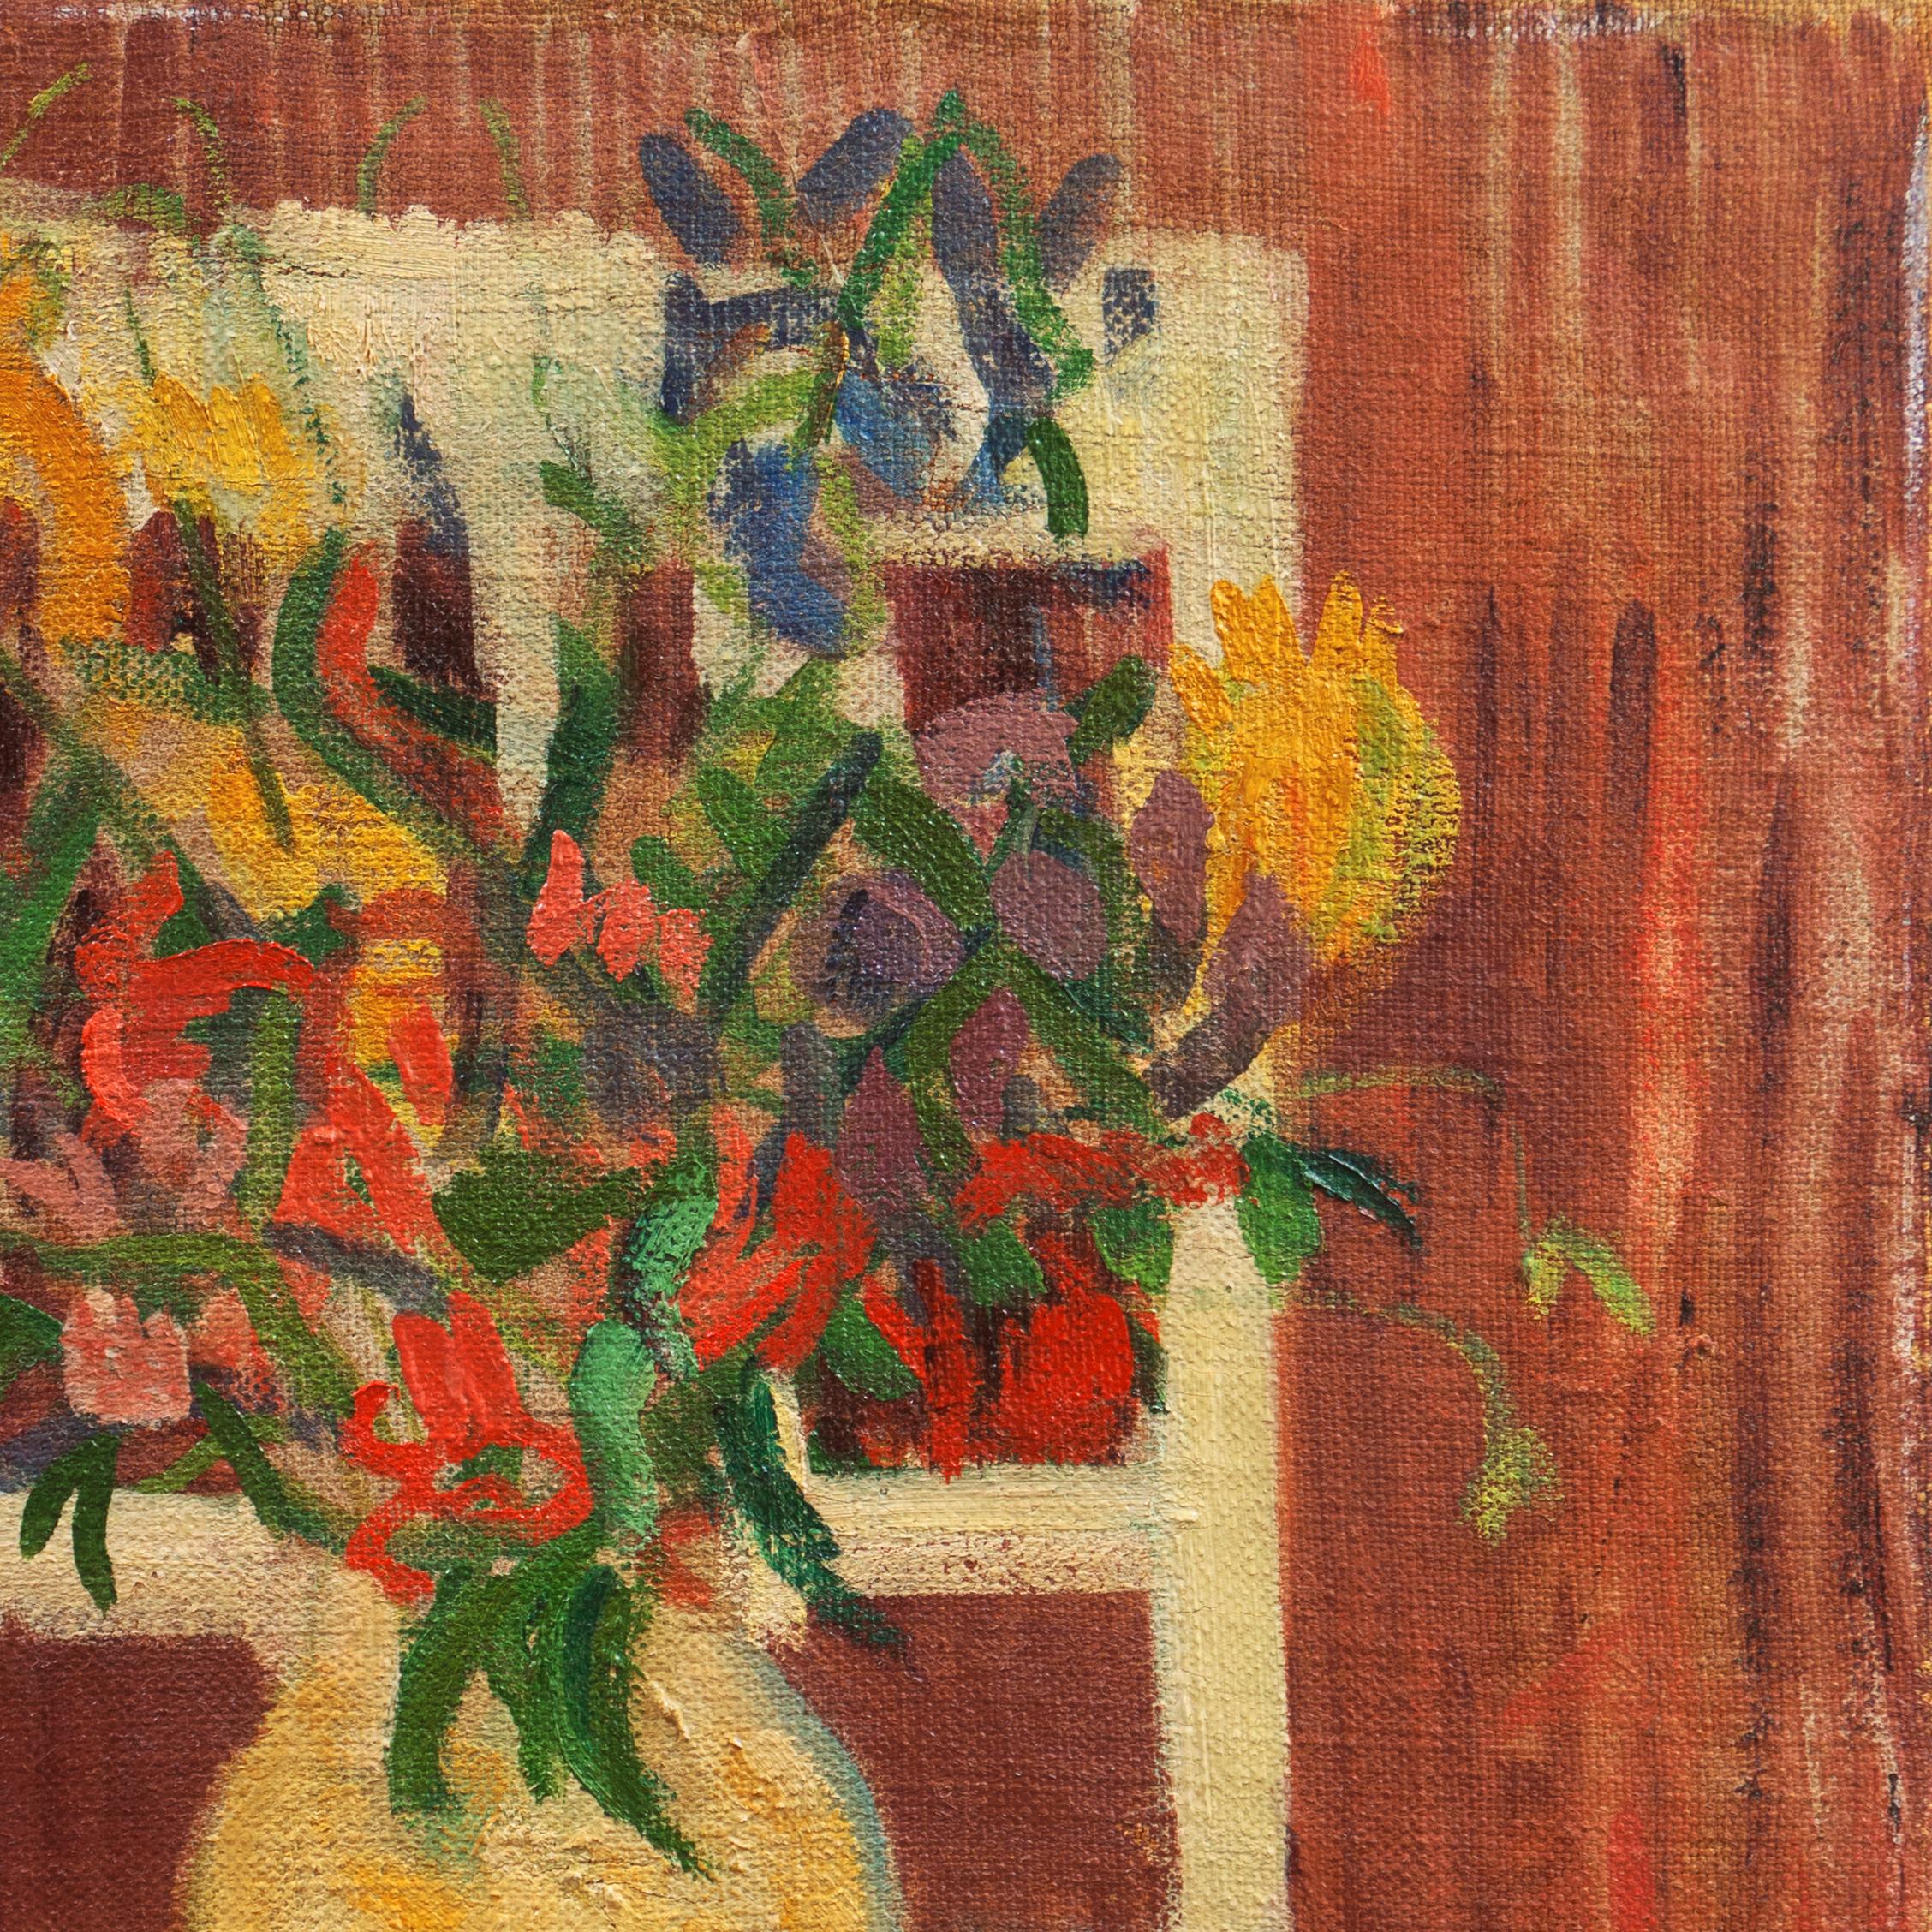 A Post-Impressionist, mid-20th century oil still-life showing purple, yellow and red blossoms arranged informally in a creamware vase standing on a chair. 

Signed lower right, 'A. M. Lütken' for Anna Marie Lütken (Danish, 1917-2001), a listed